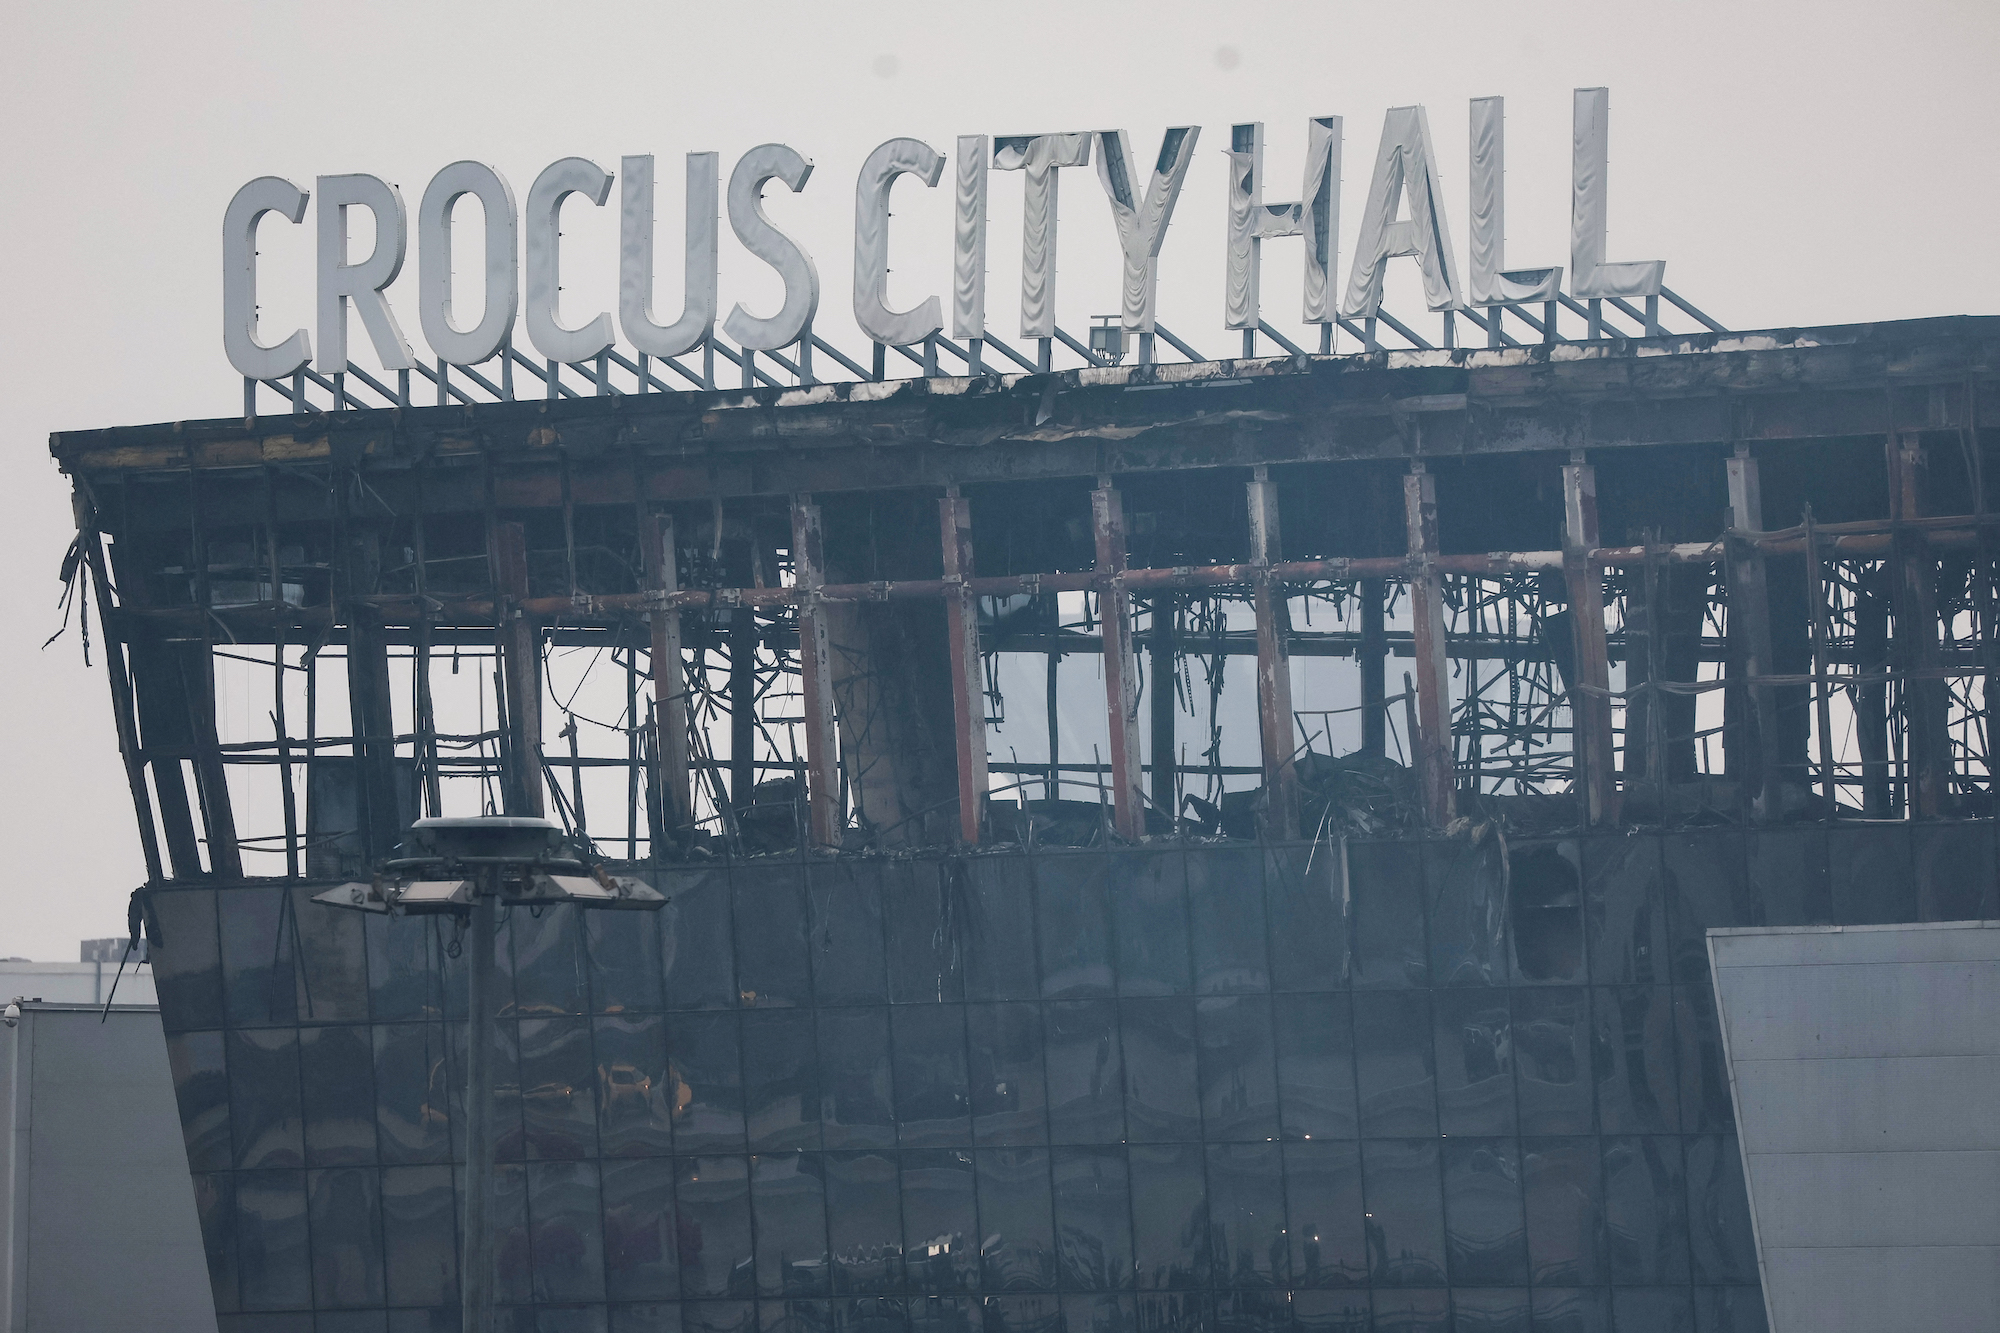 A view shows the burned Crocus City Hall concert hall in Krasnogorsk, outside Moscow, on Saturday.